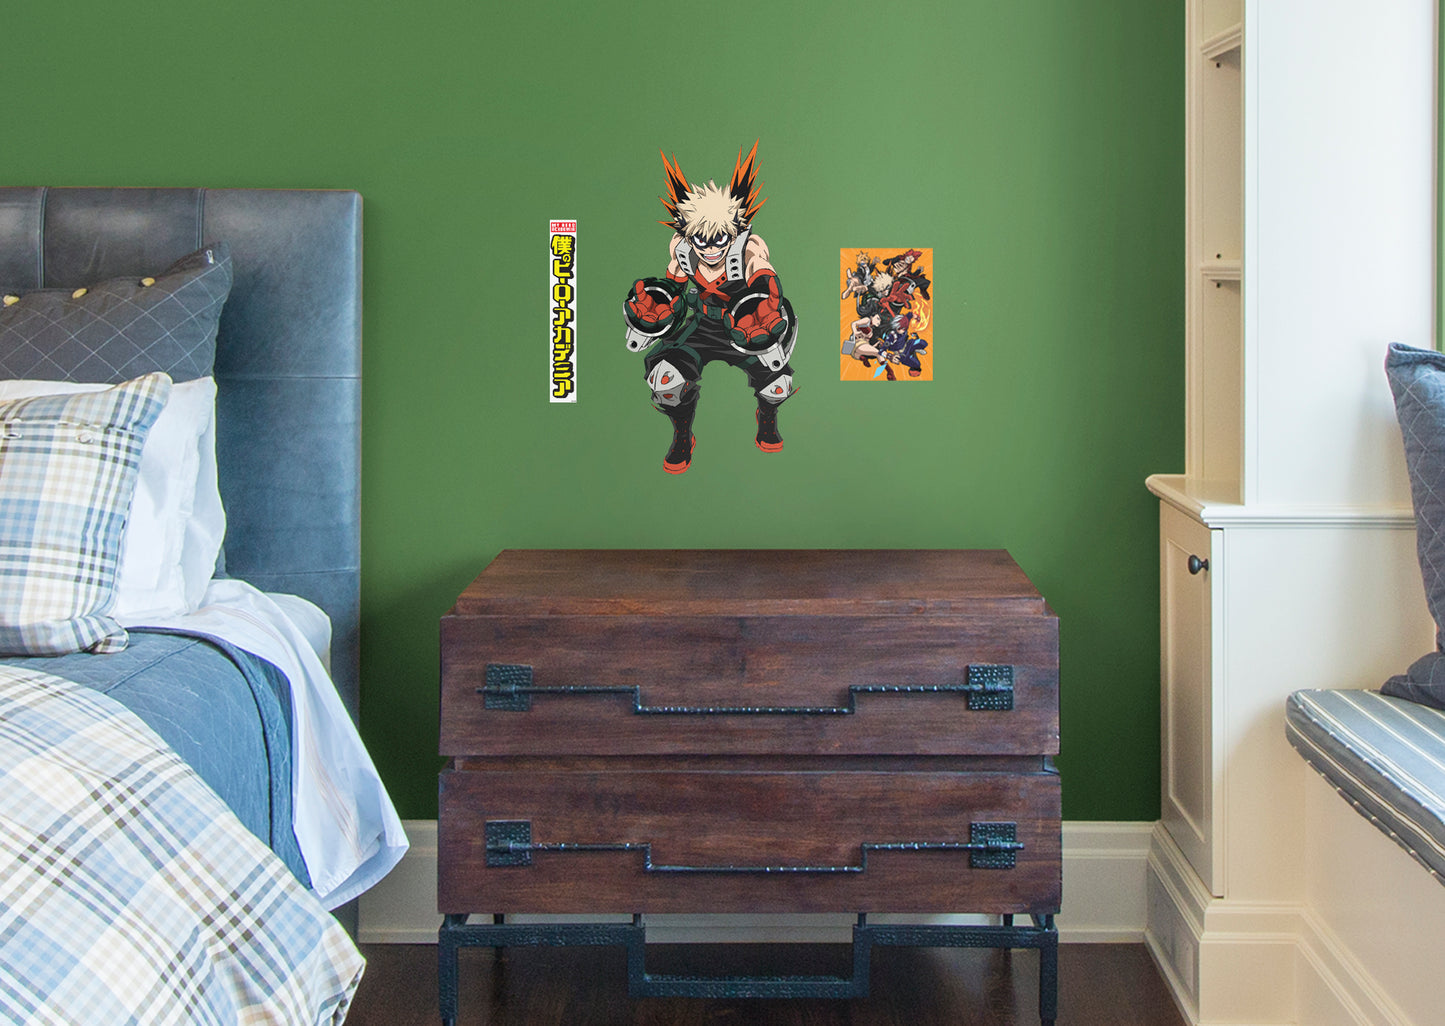 My Hero Academia: BAKUGO RealBig        - Officially Licensed Funimation Removable     Adhesive Decal